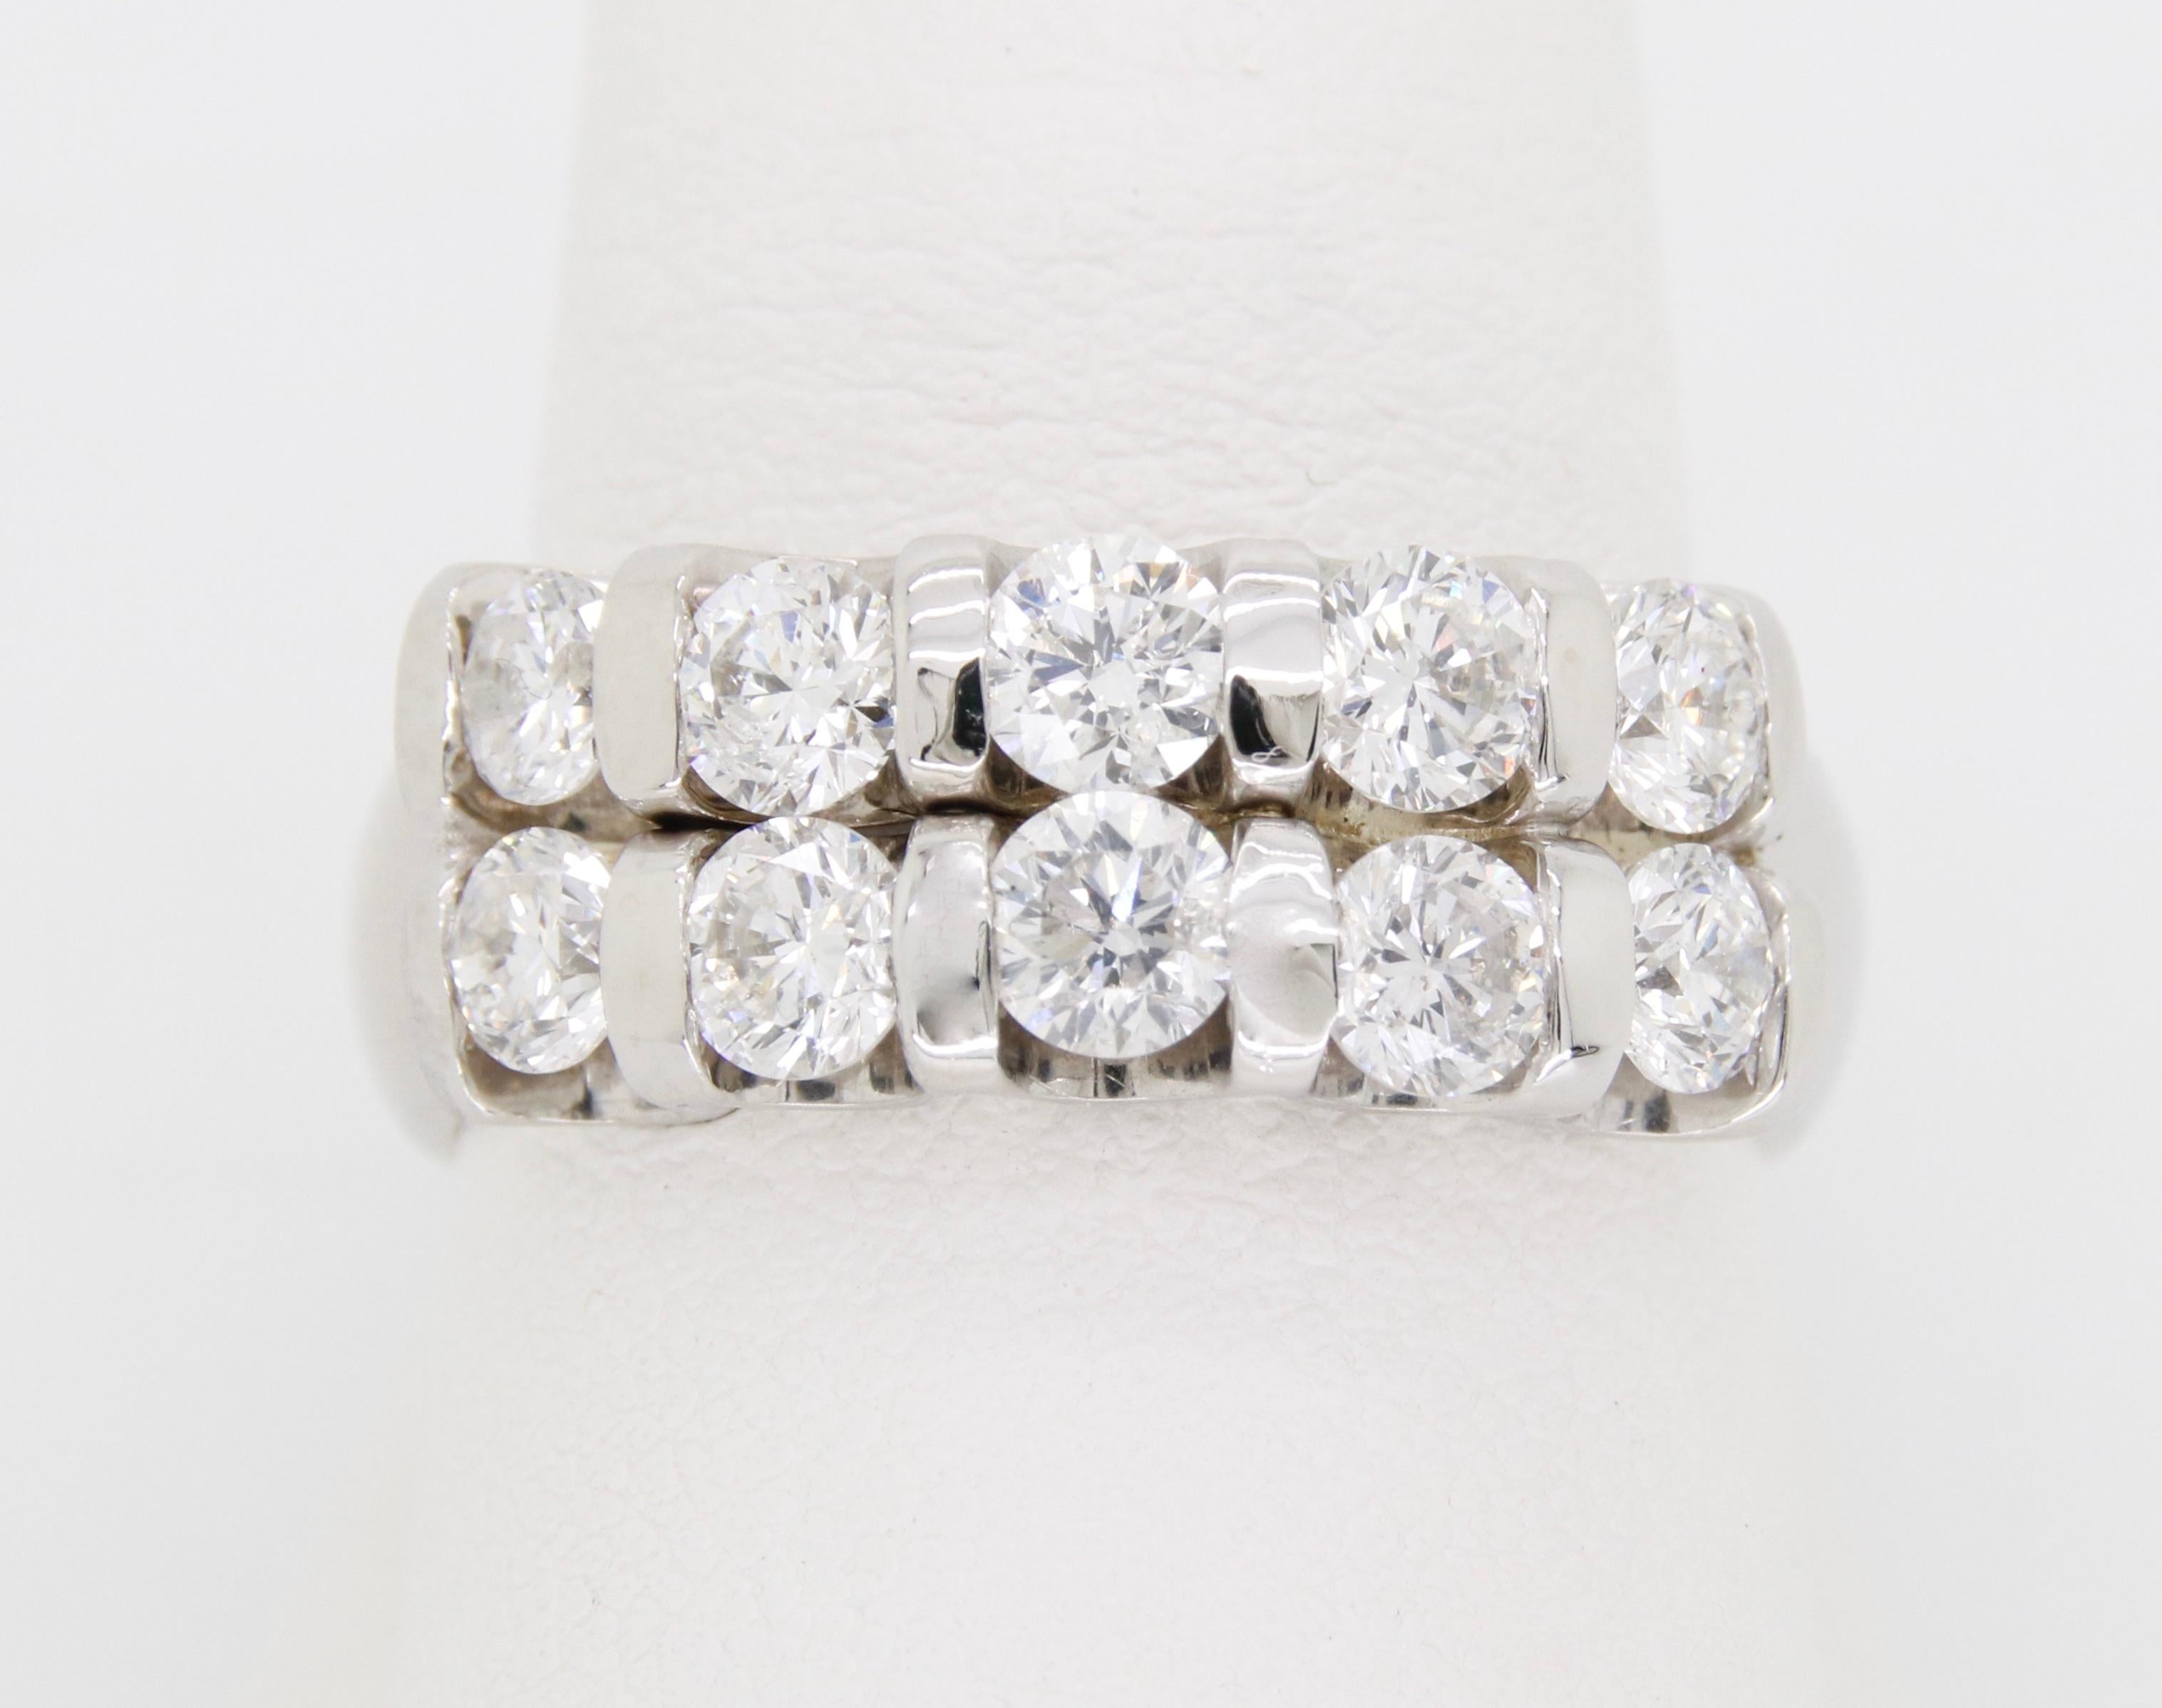 Two-row diamond band made with 2.00ctw of Round Brilliant cut diamonds. 

Diamond Cut: Round Brilliant 
Total Diamond Carat Weight: Approximately 2.00CTW
Average Diamond Color: G-J
Average Diamond Clarity: SI1-I1
Metal: 14k White Gold
Ring Size: 8.5